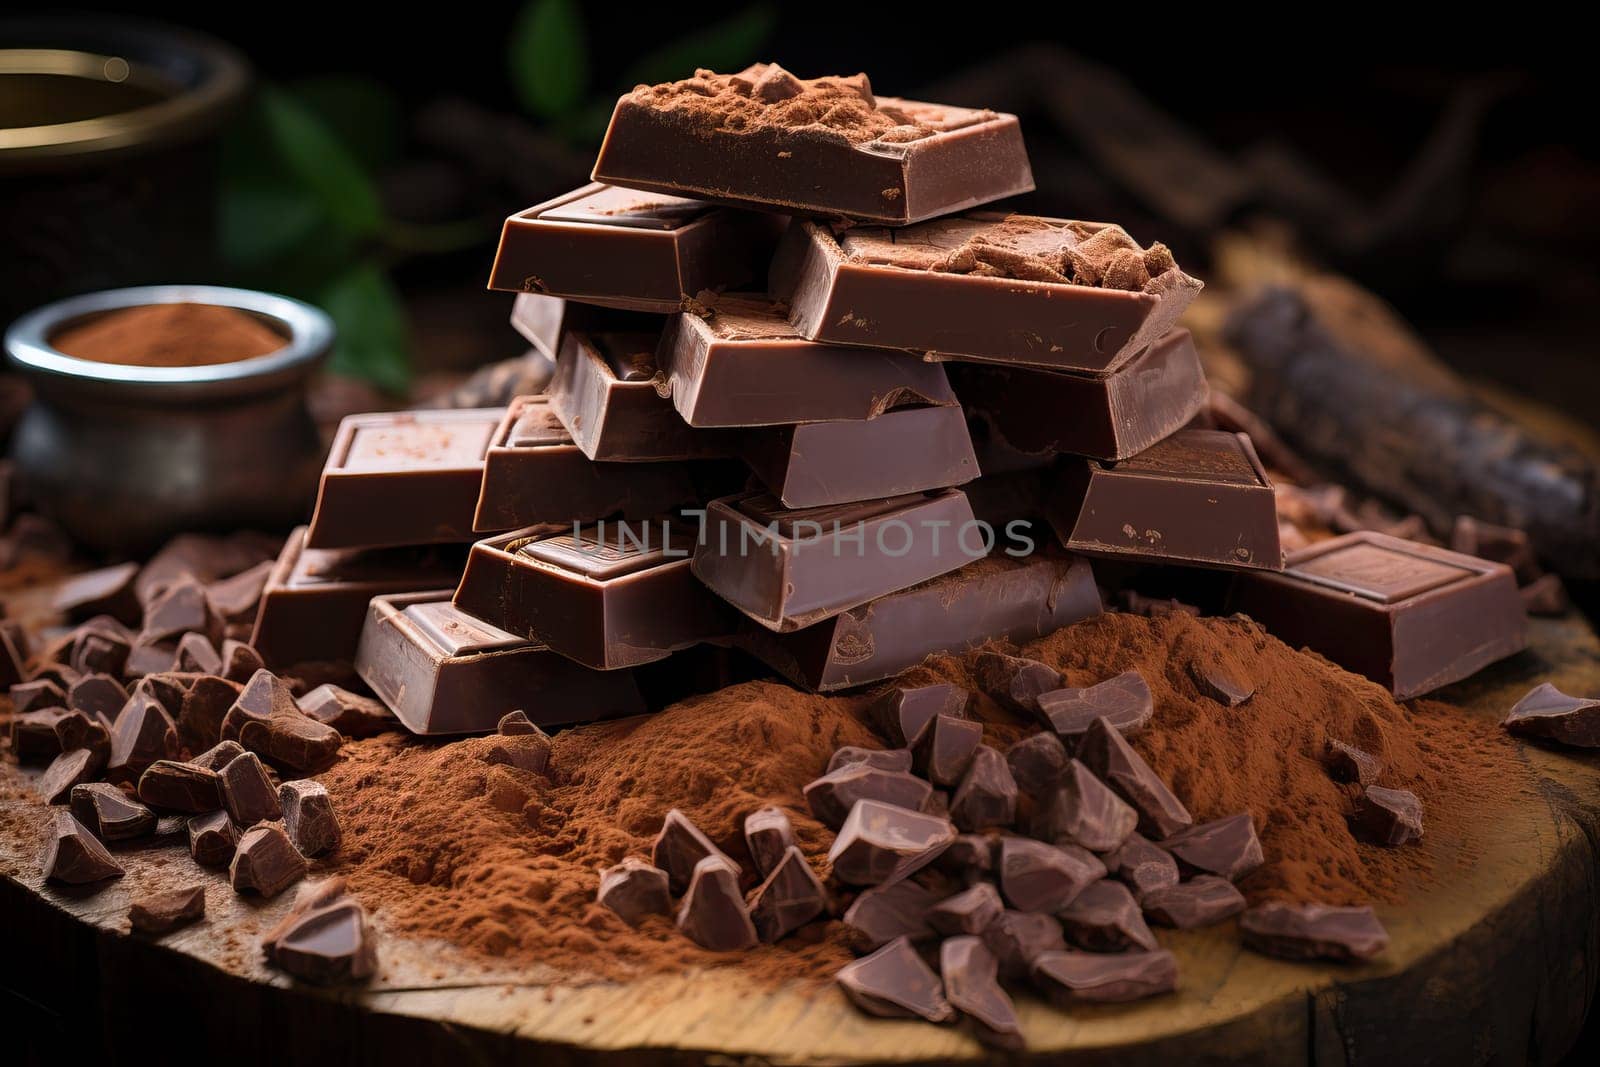 Pieces of dark chocolate sprinkled with cocoa powder, a natural antioxidant.